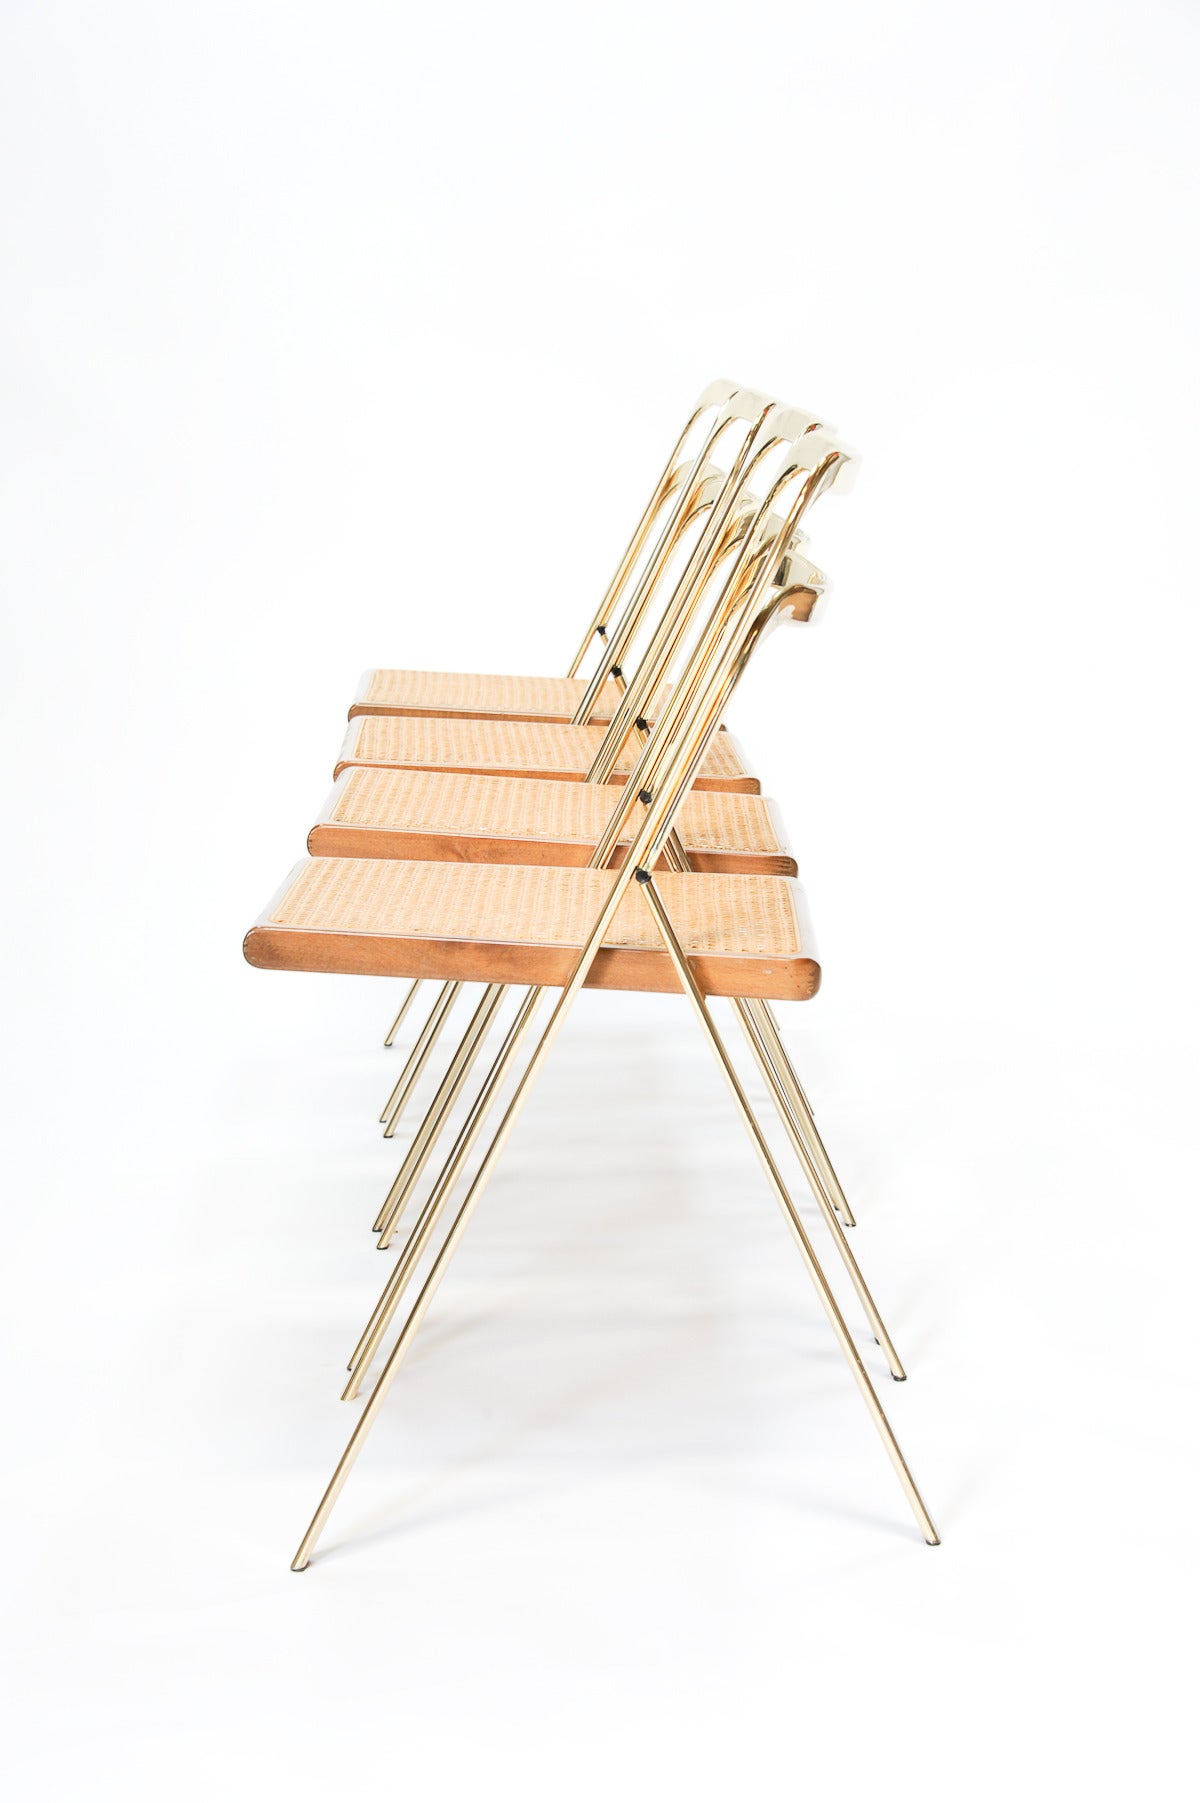 A wonderful set of folding chairs by Cidue. They are refined and elegant in their style and structure.